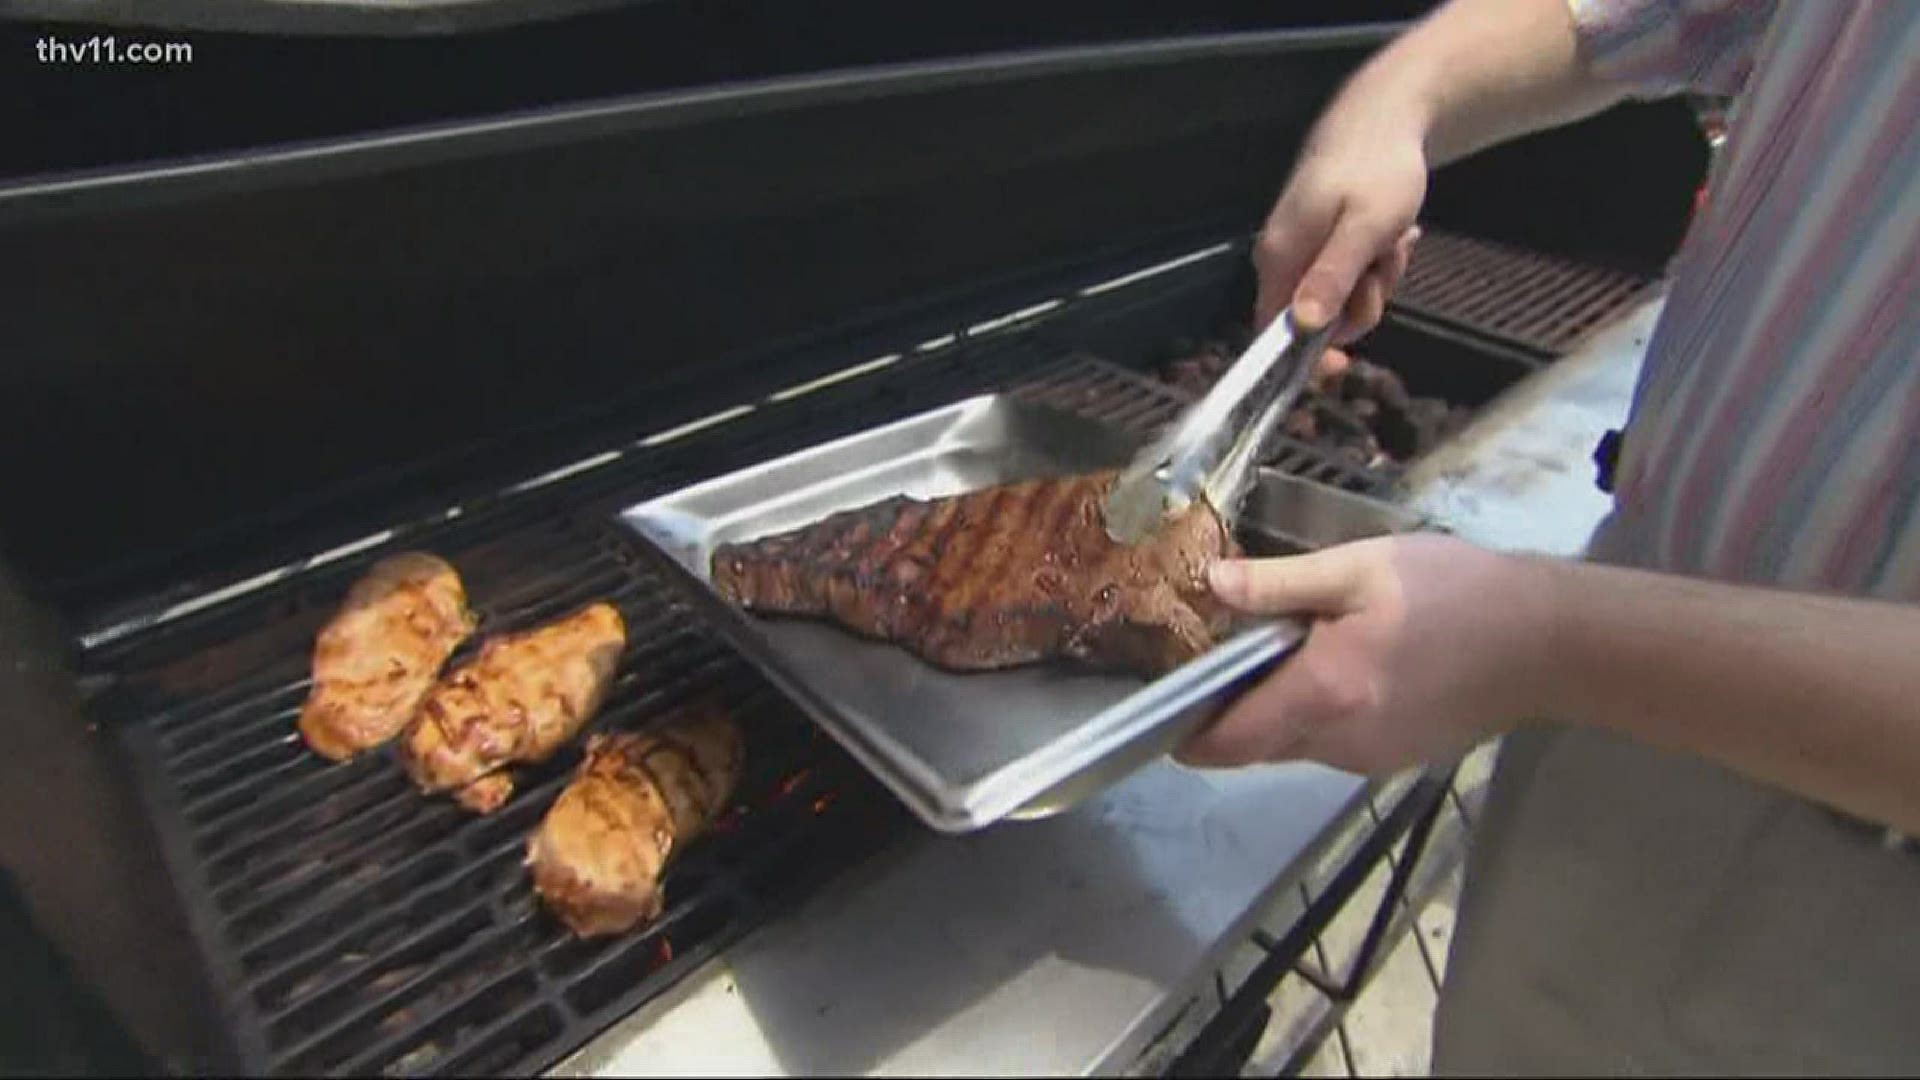 Memorial Day weekend is going to mean family and neighborhood gatherings for many of us. With that in mind, Arkansas health experts are giving a warning.